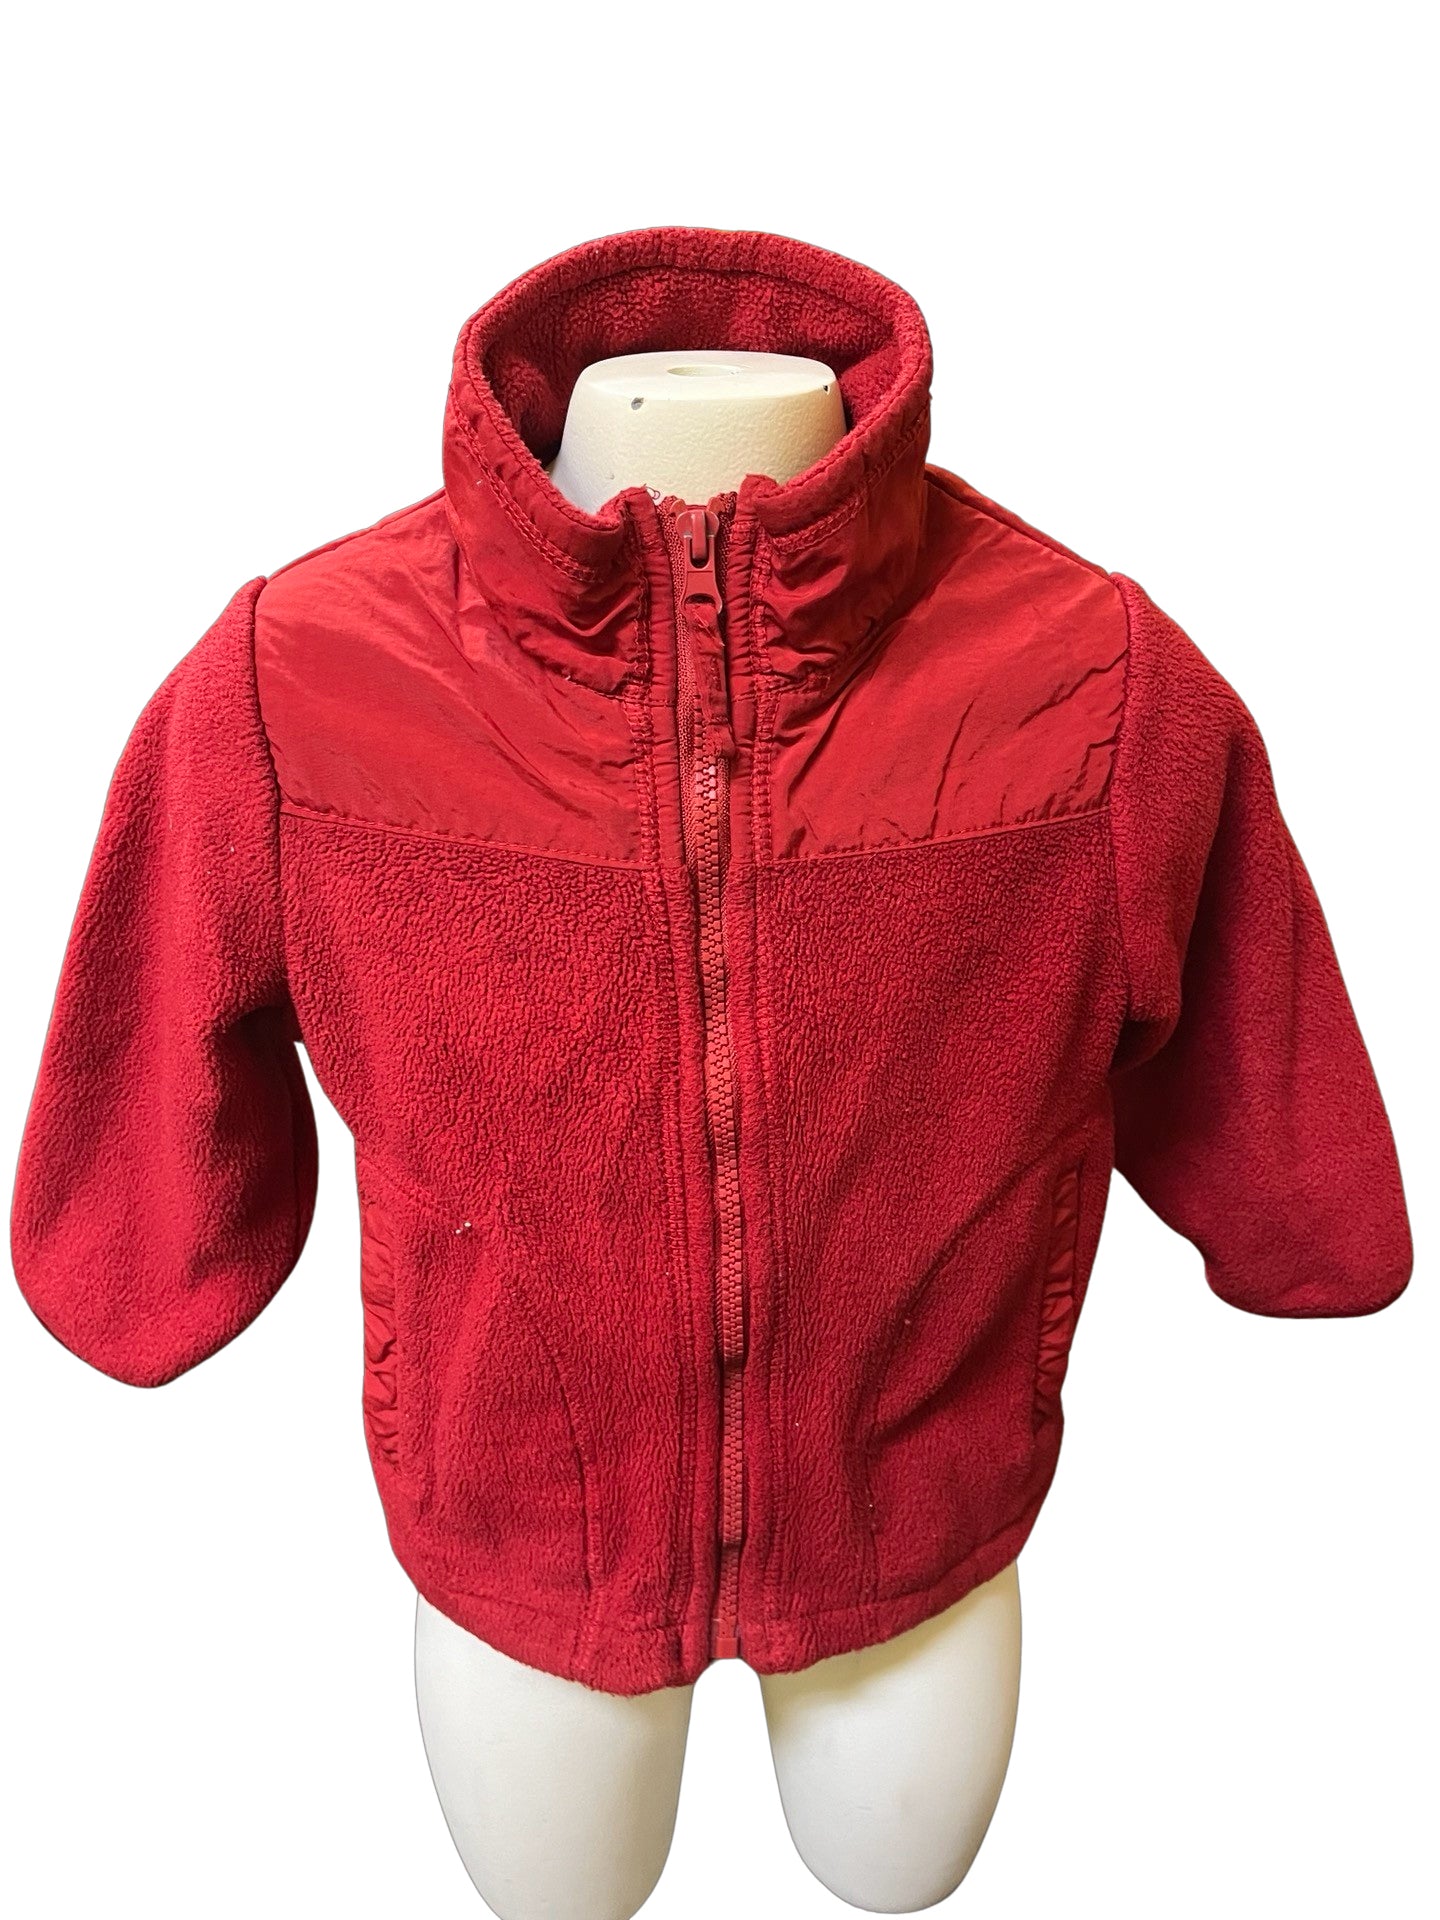 Children's Place Size 3t Red Jacket - boys